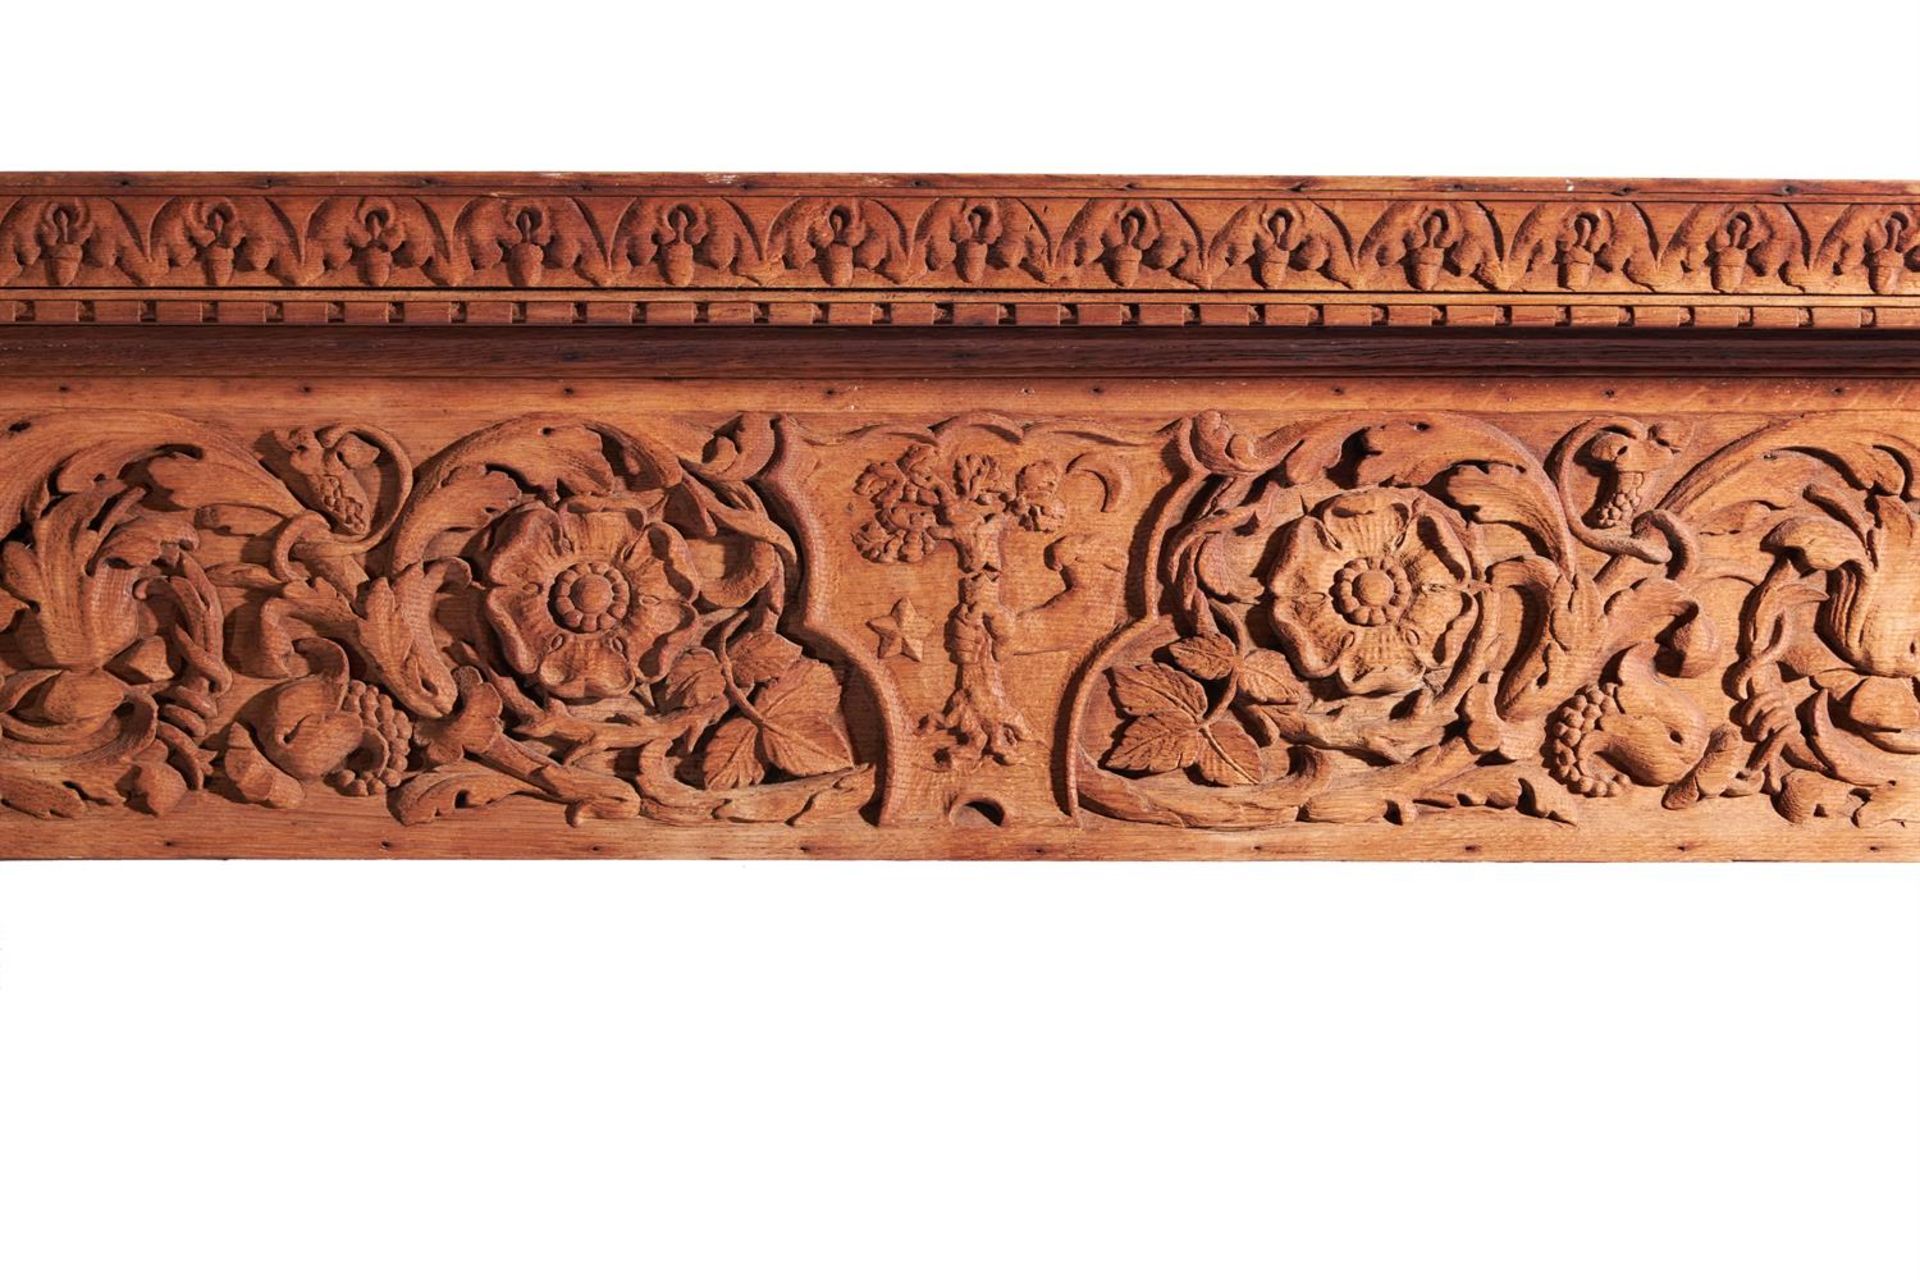 A VICTORIAN RENAISSANCE REVIVAL CARVED OAK CHIMNEYPIECE, LATE 19TH CENTURY - Image 5 of 6